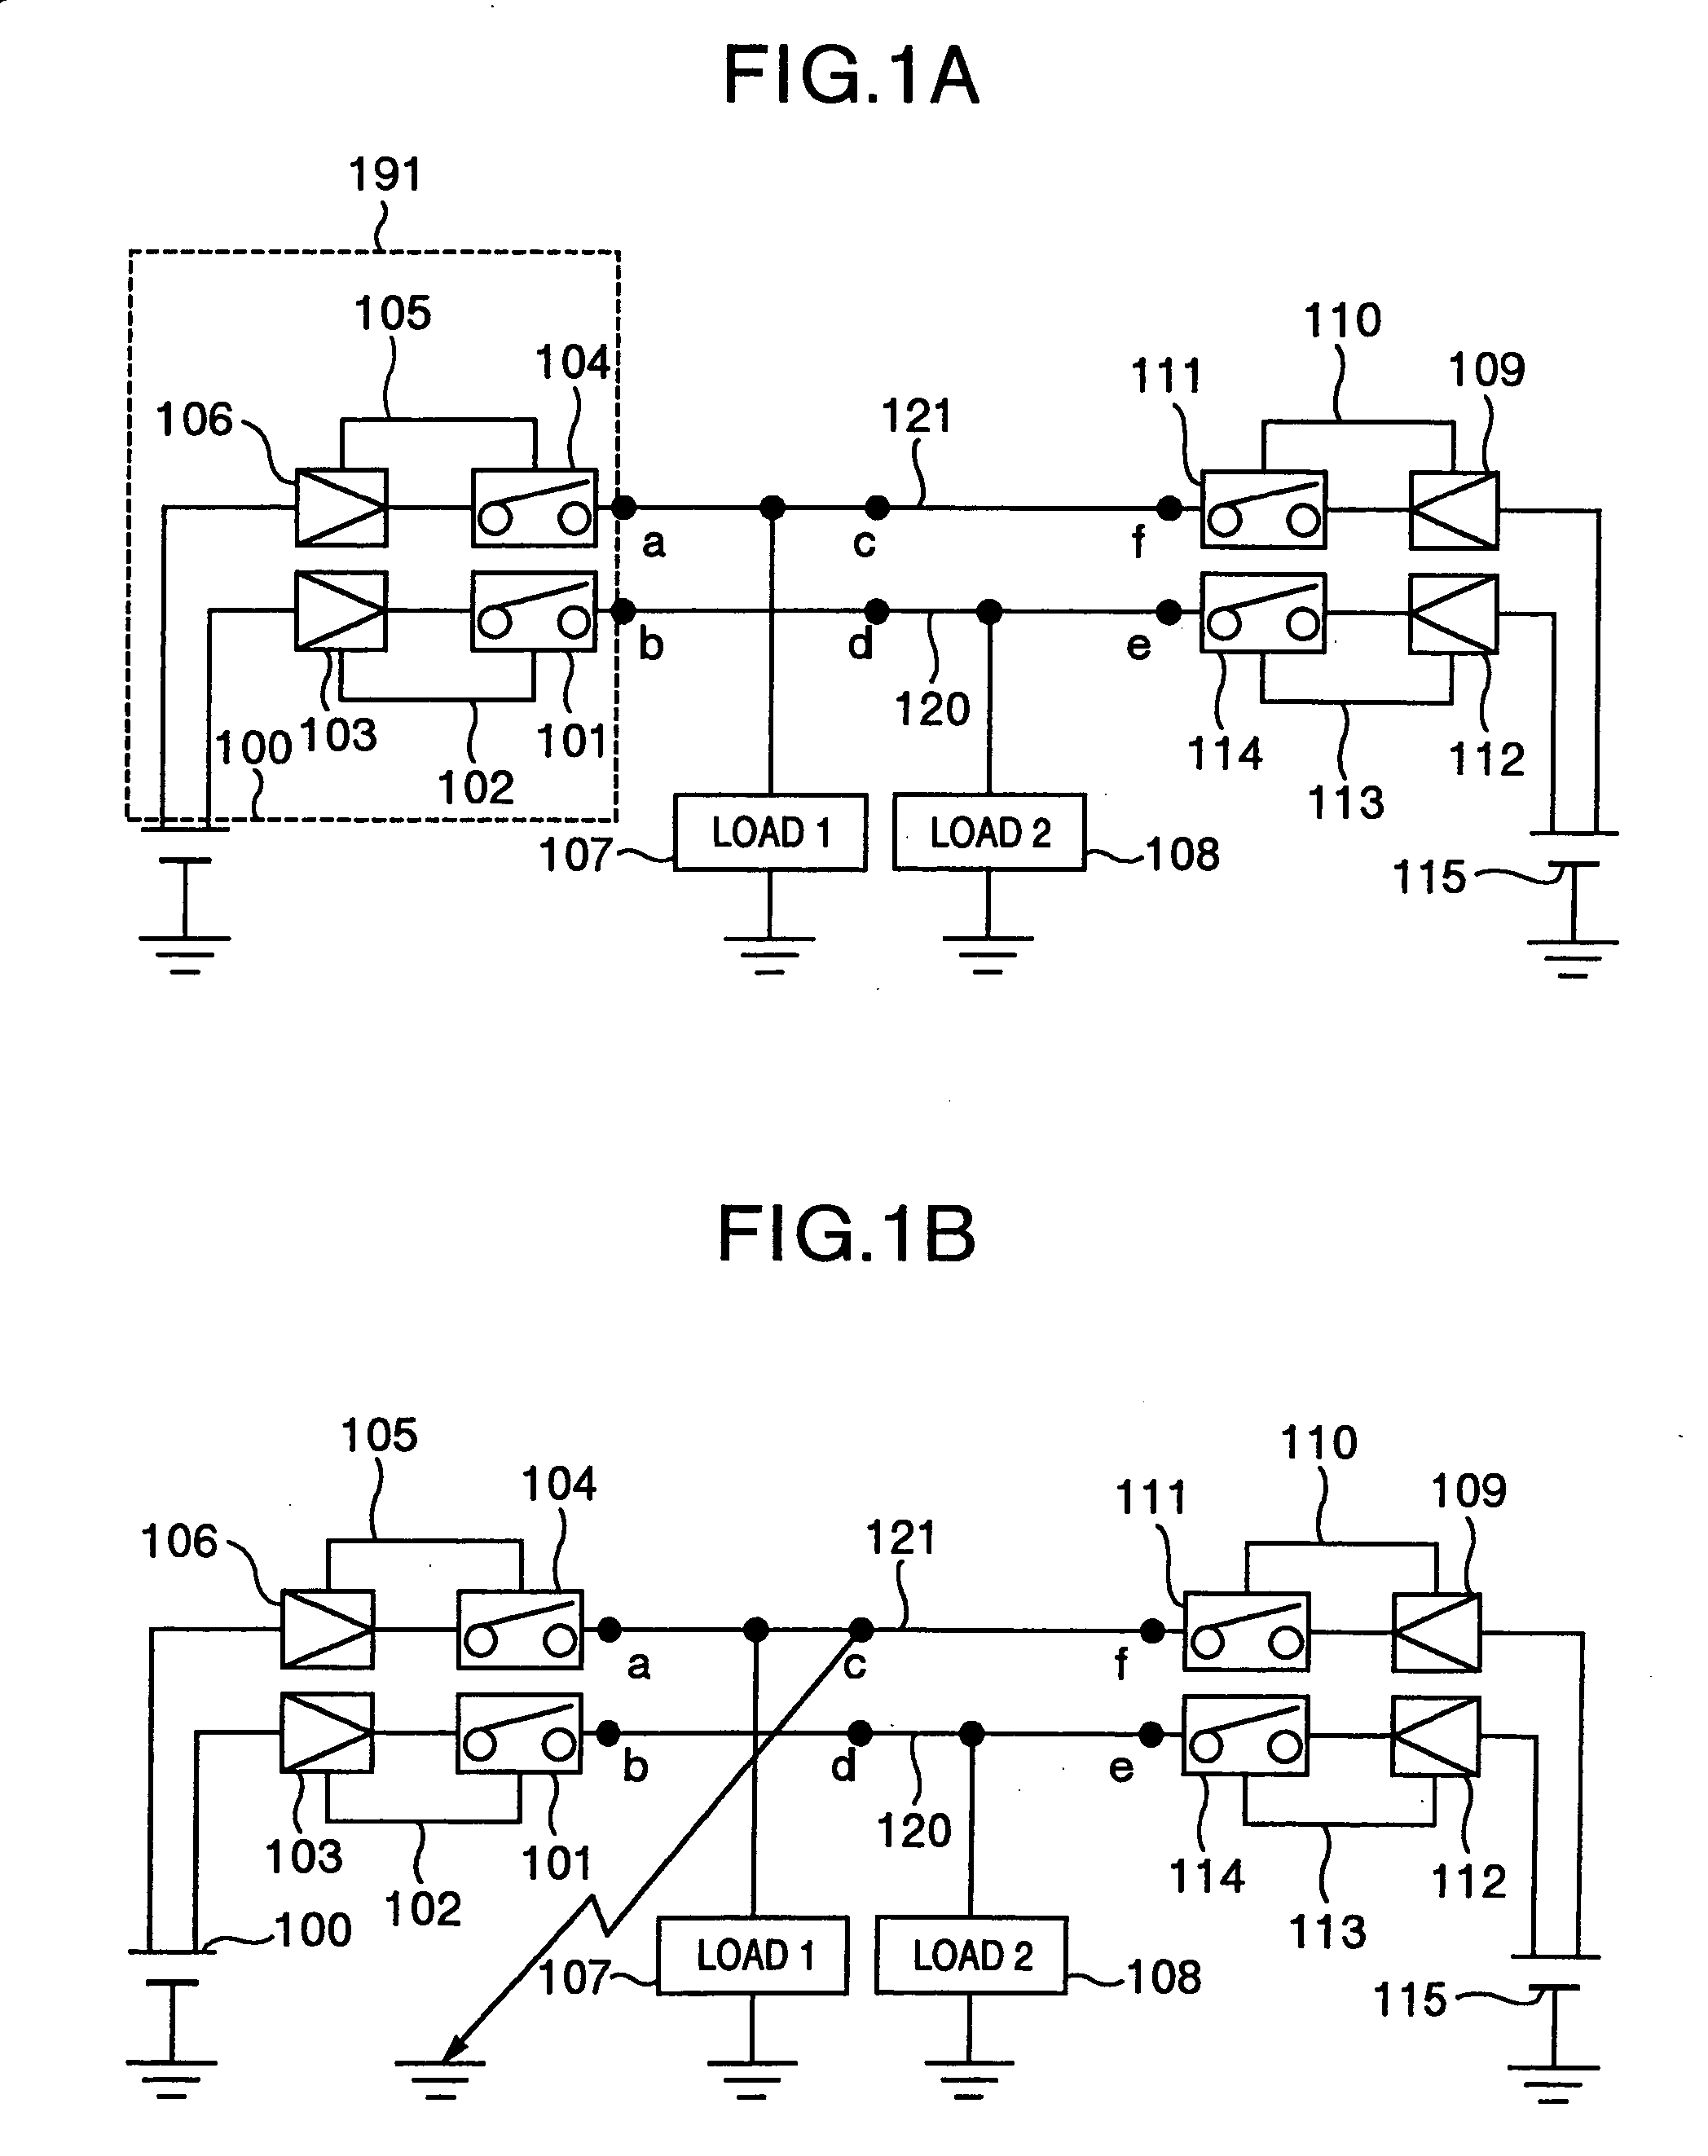 Power supplying apparatus and method for a vehicle